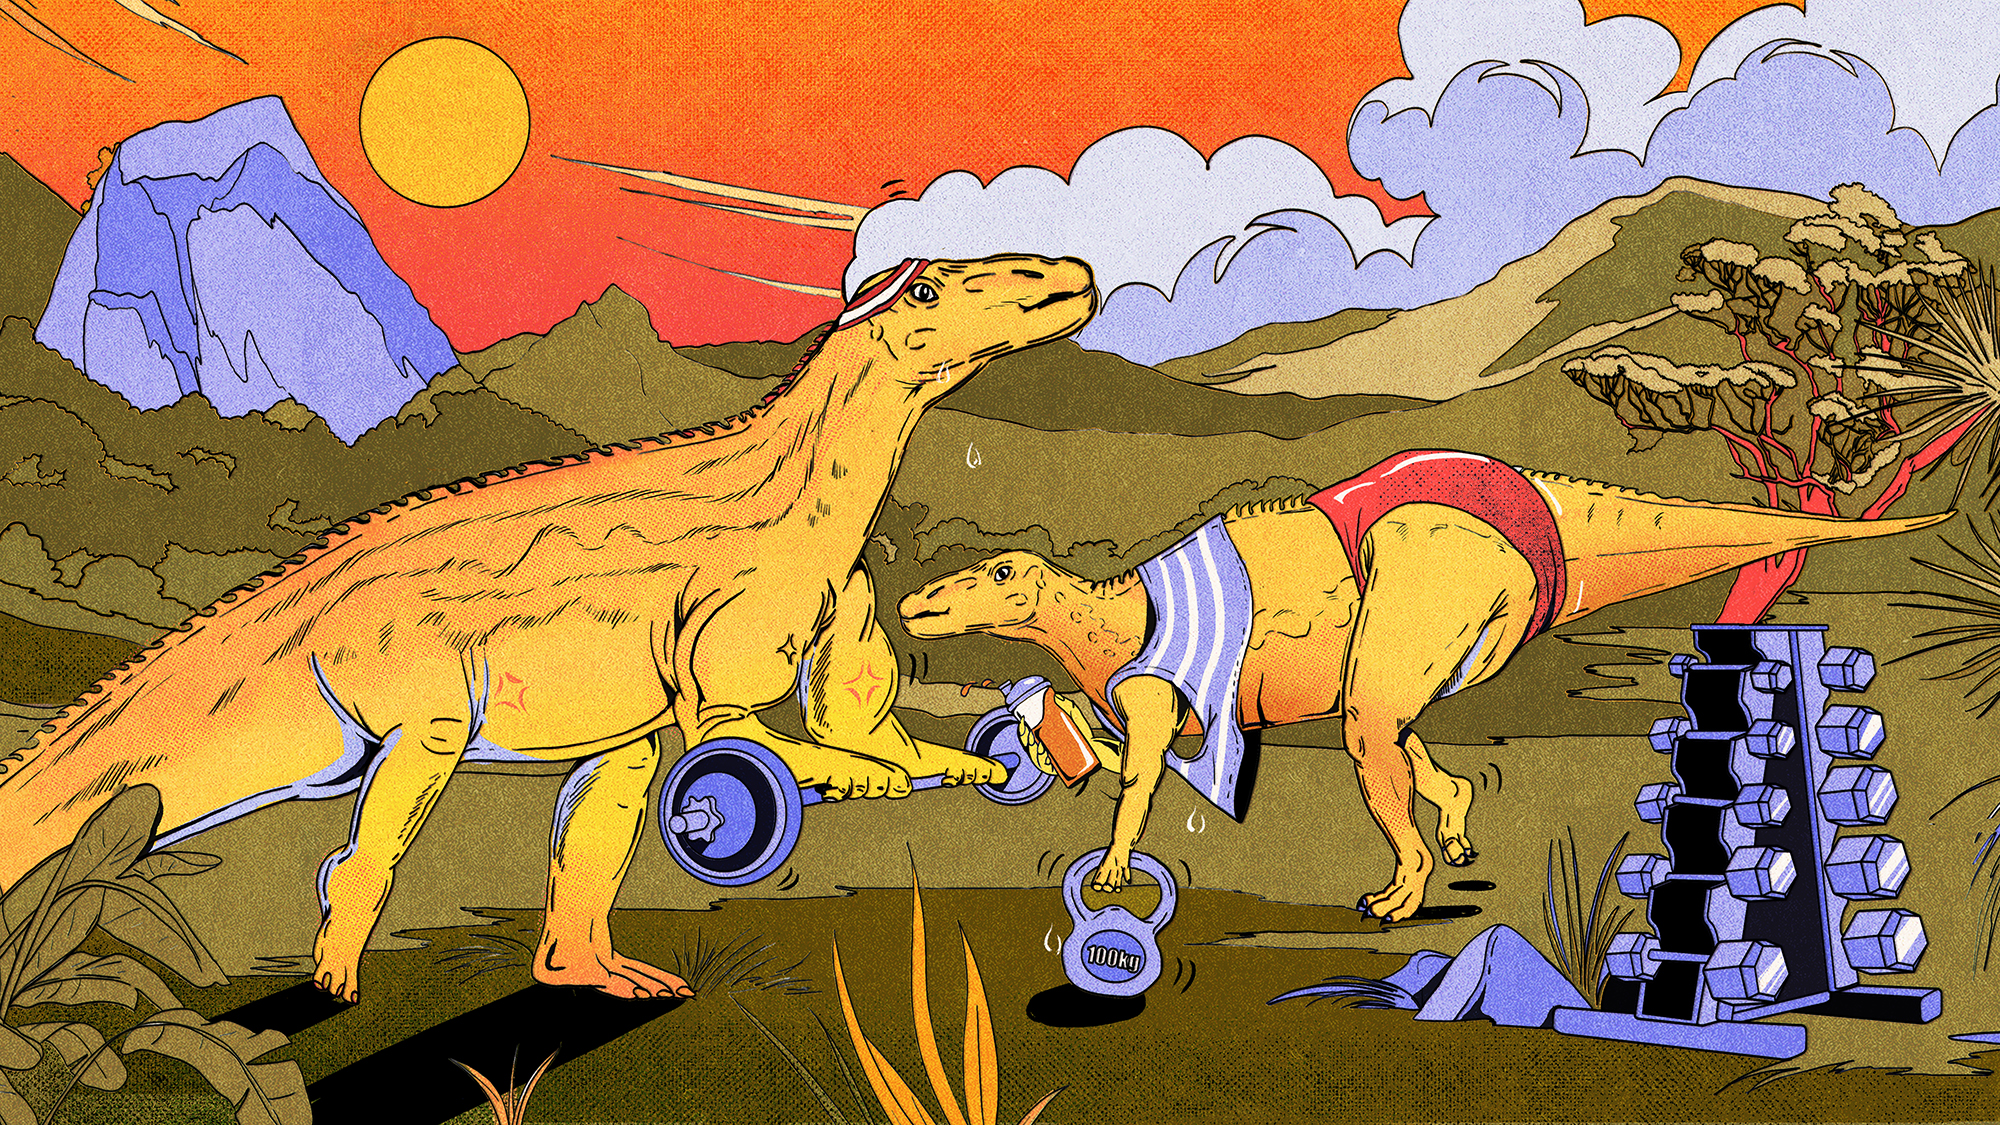 Illustration in green, yellow, orange, and purple of big sauropod dinosaurs lifting weights in front of a prehistoric landscape